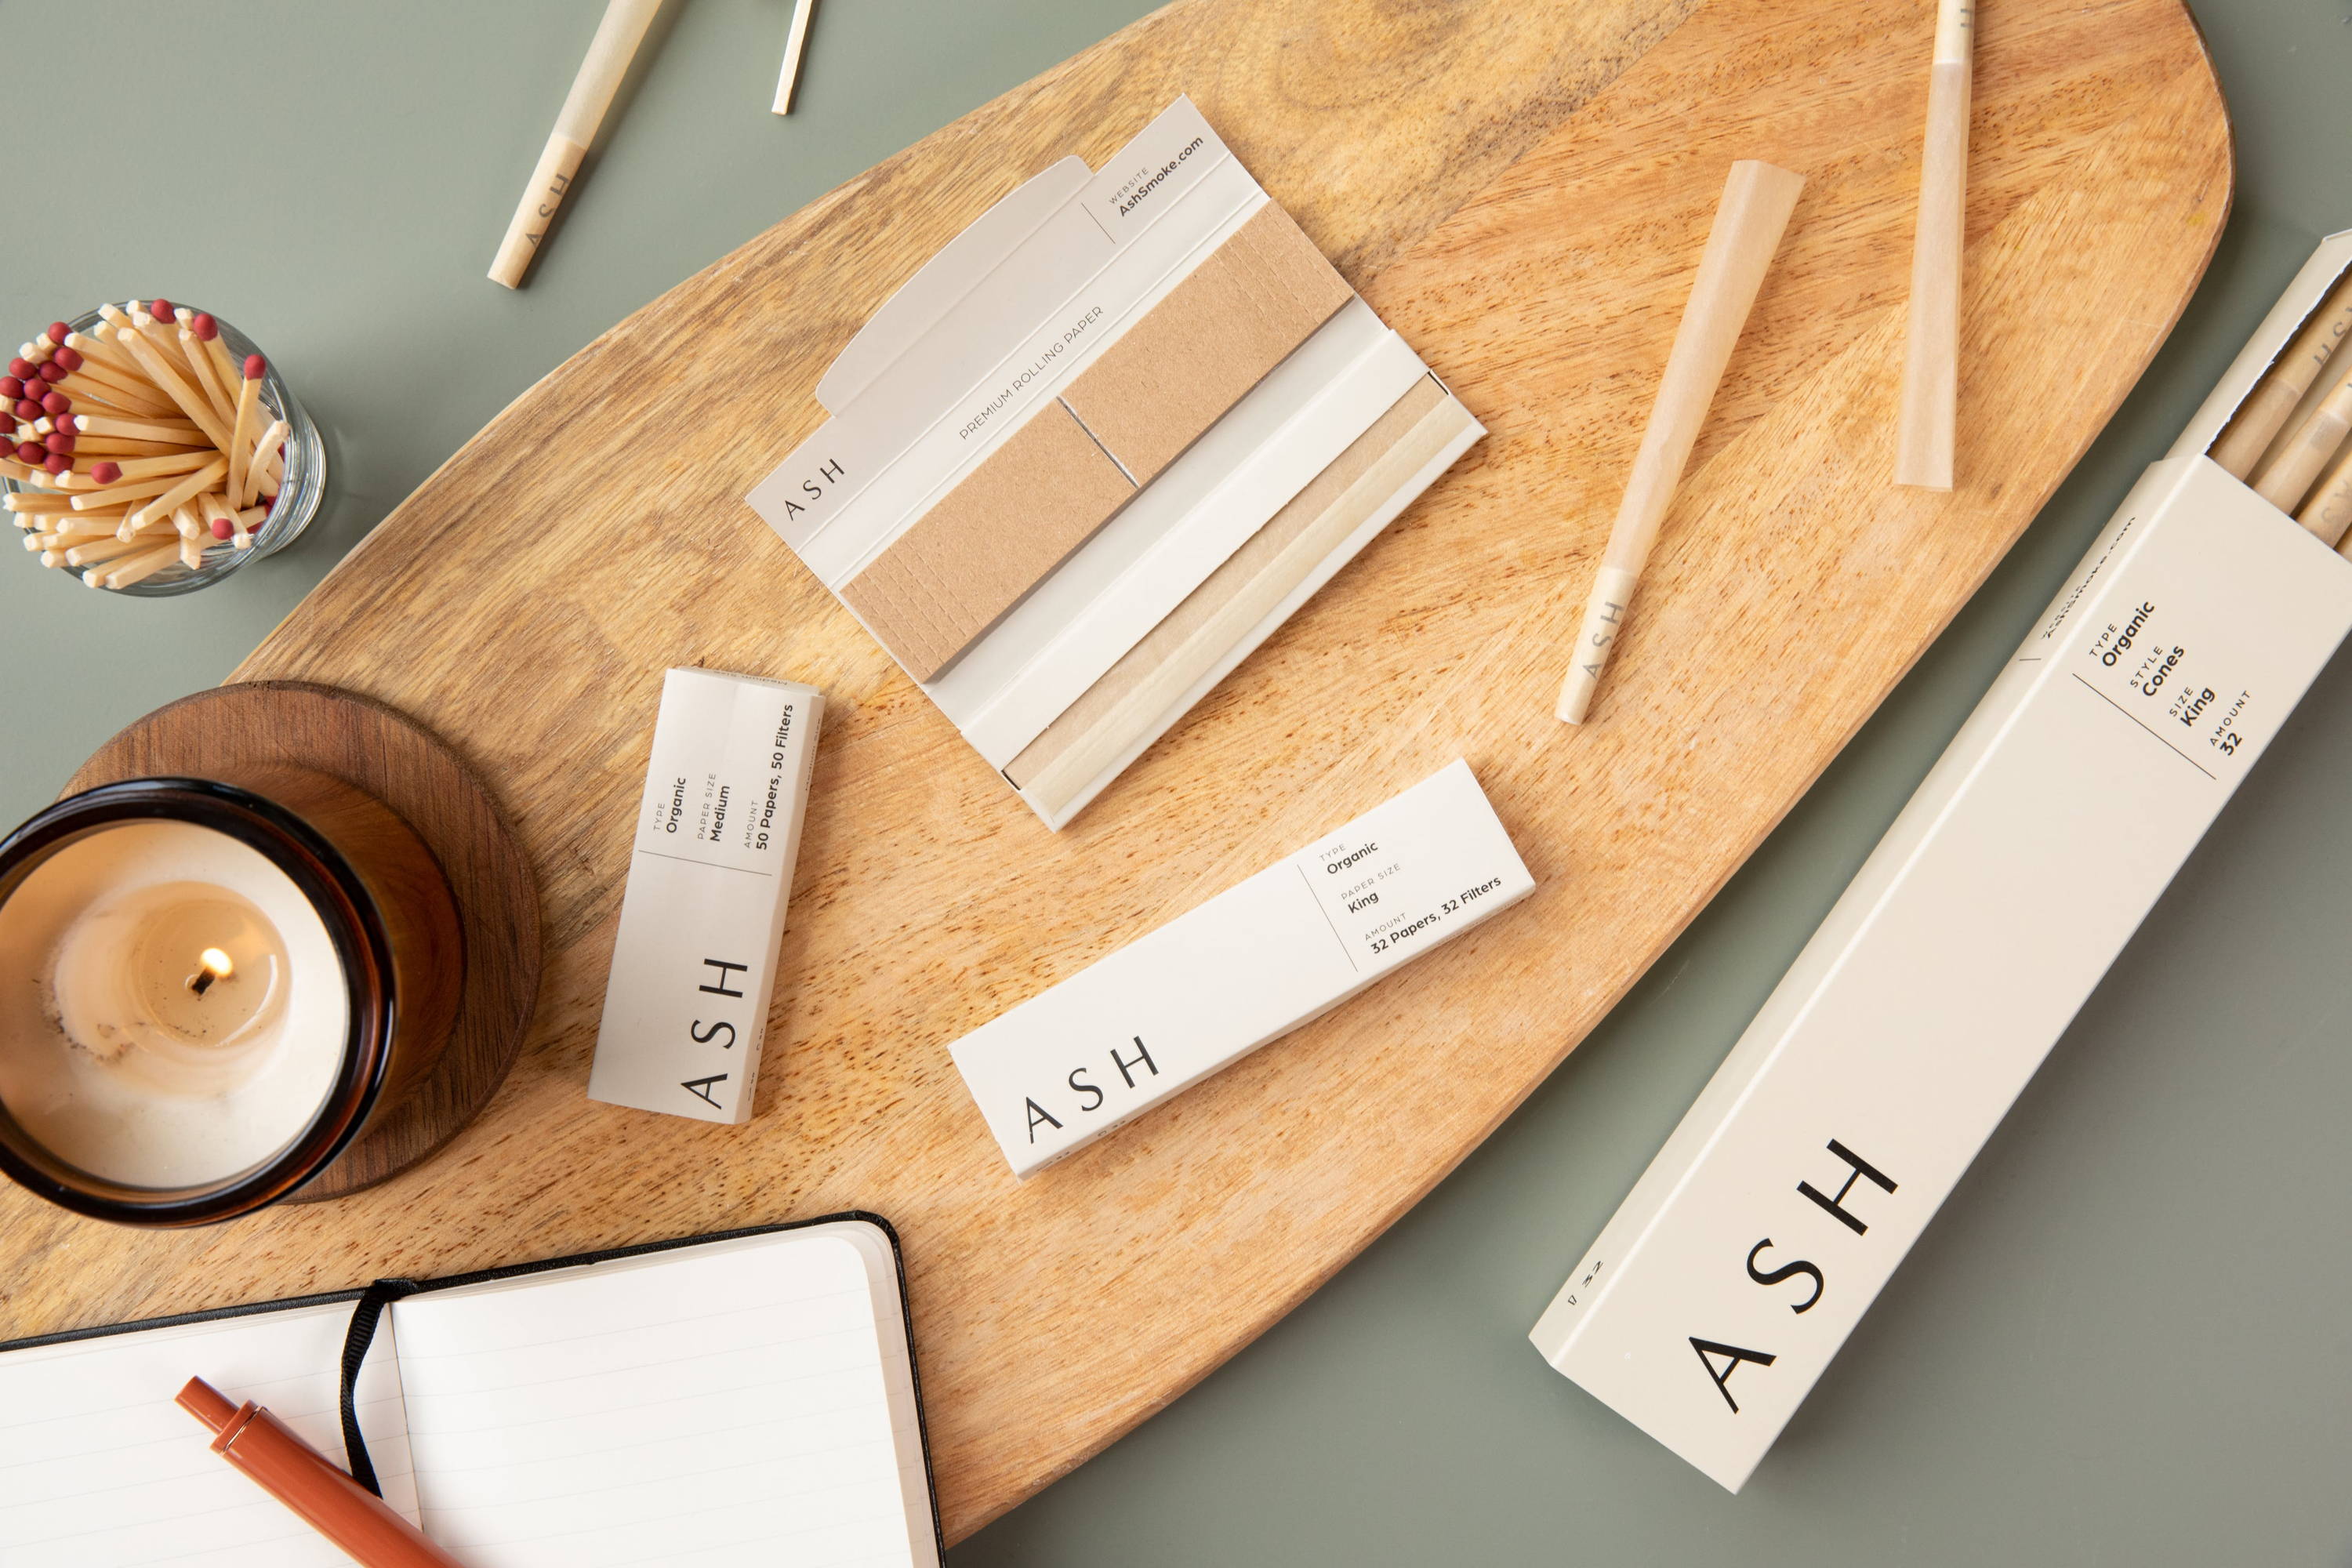 Table picture of ASH rolling collection that says ASH Premium Rolling Papers